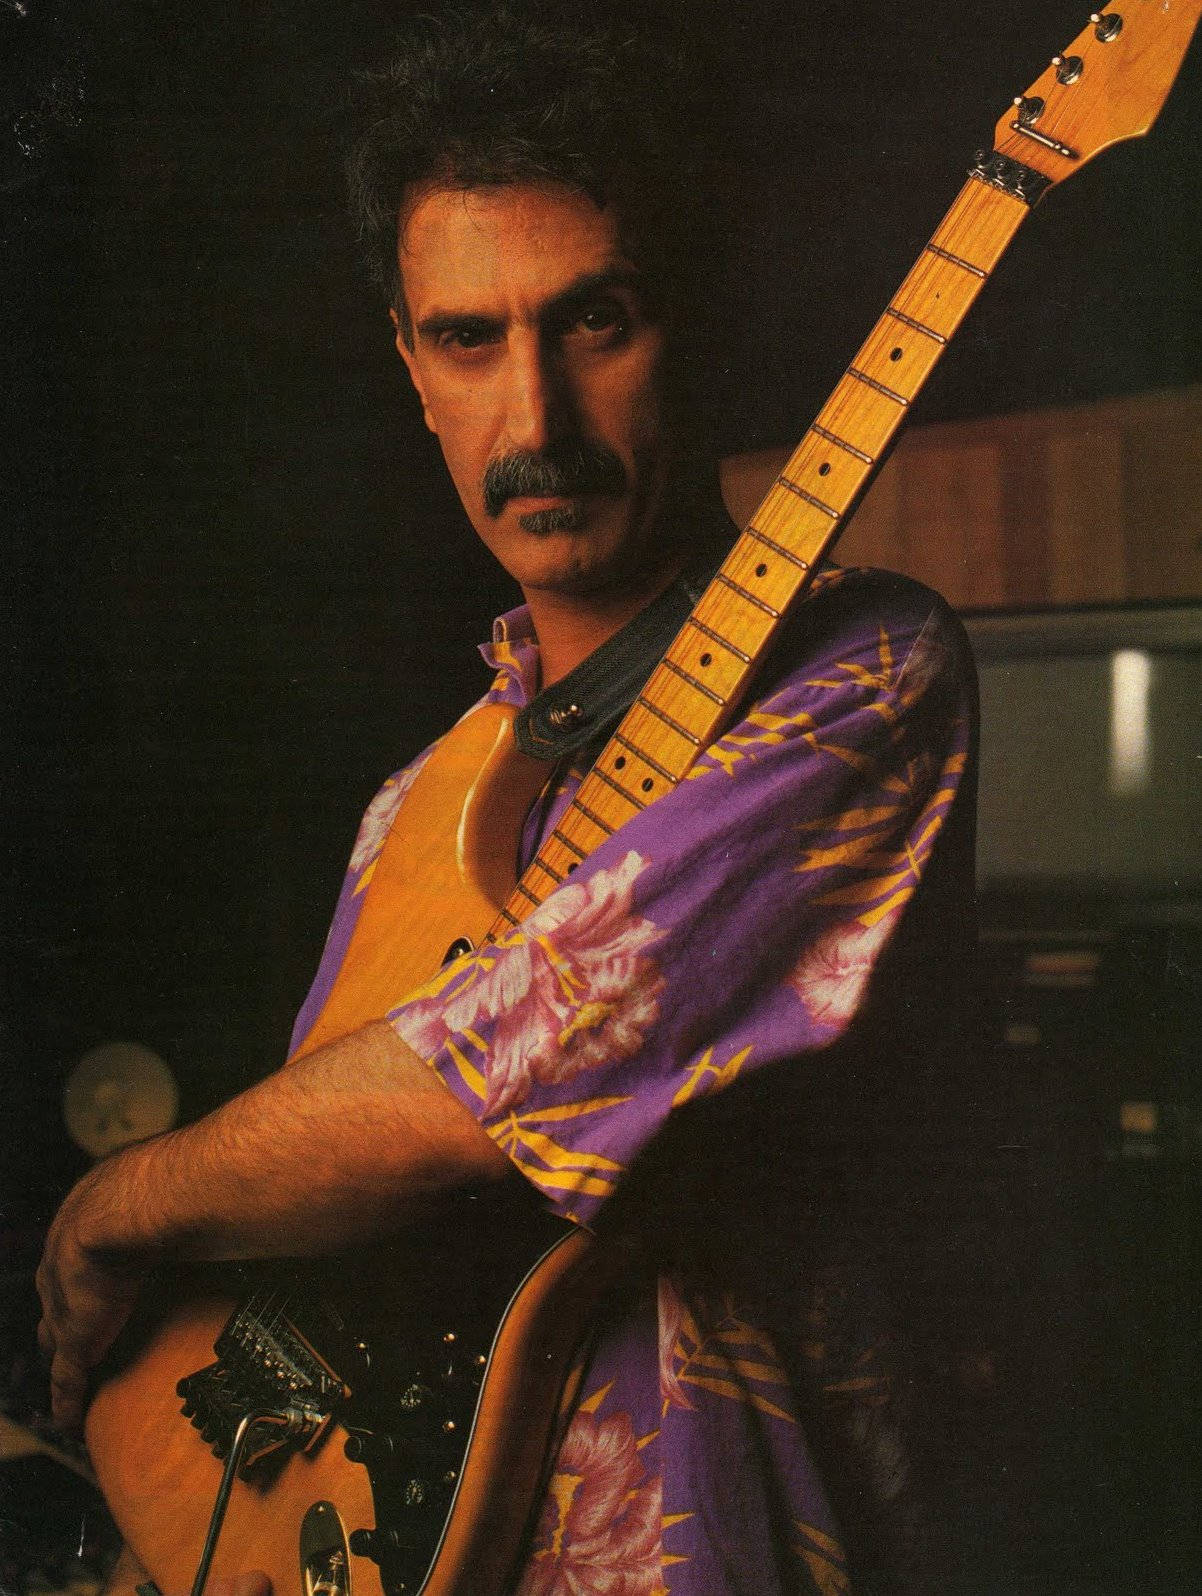 Bandleaderfrank Zappa Can Be Translated To German As 